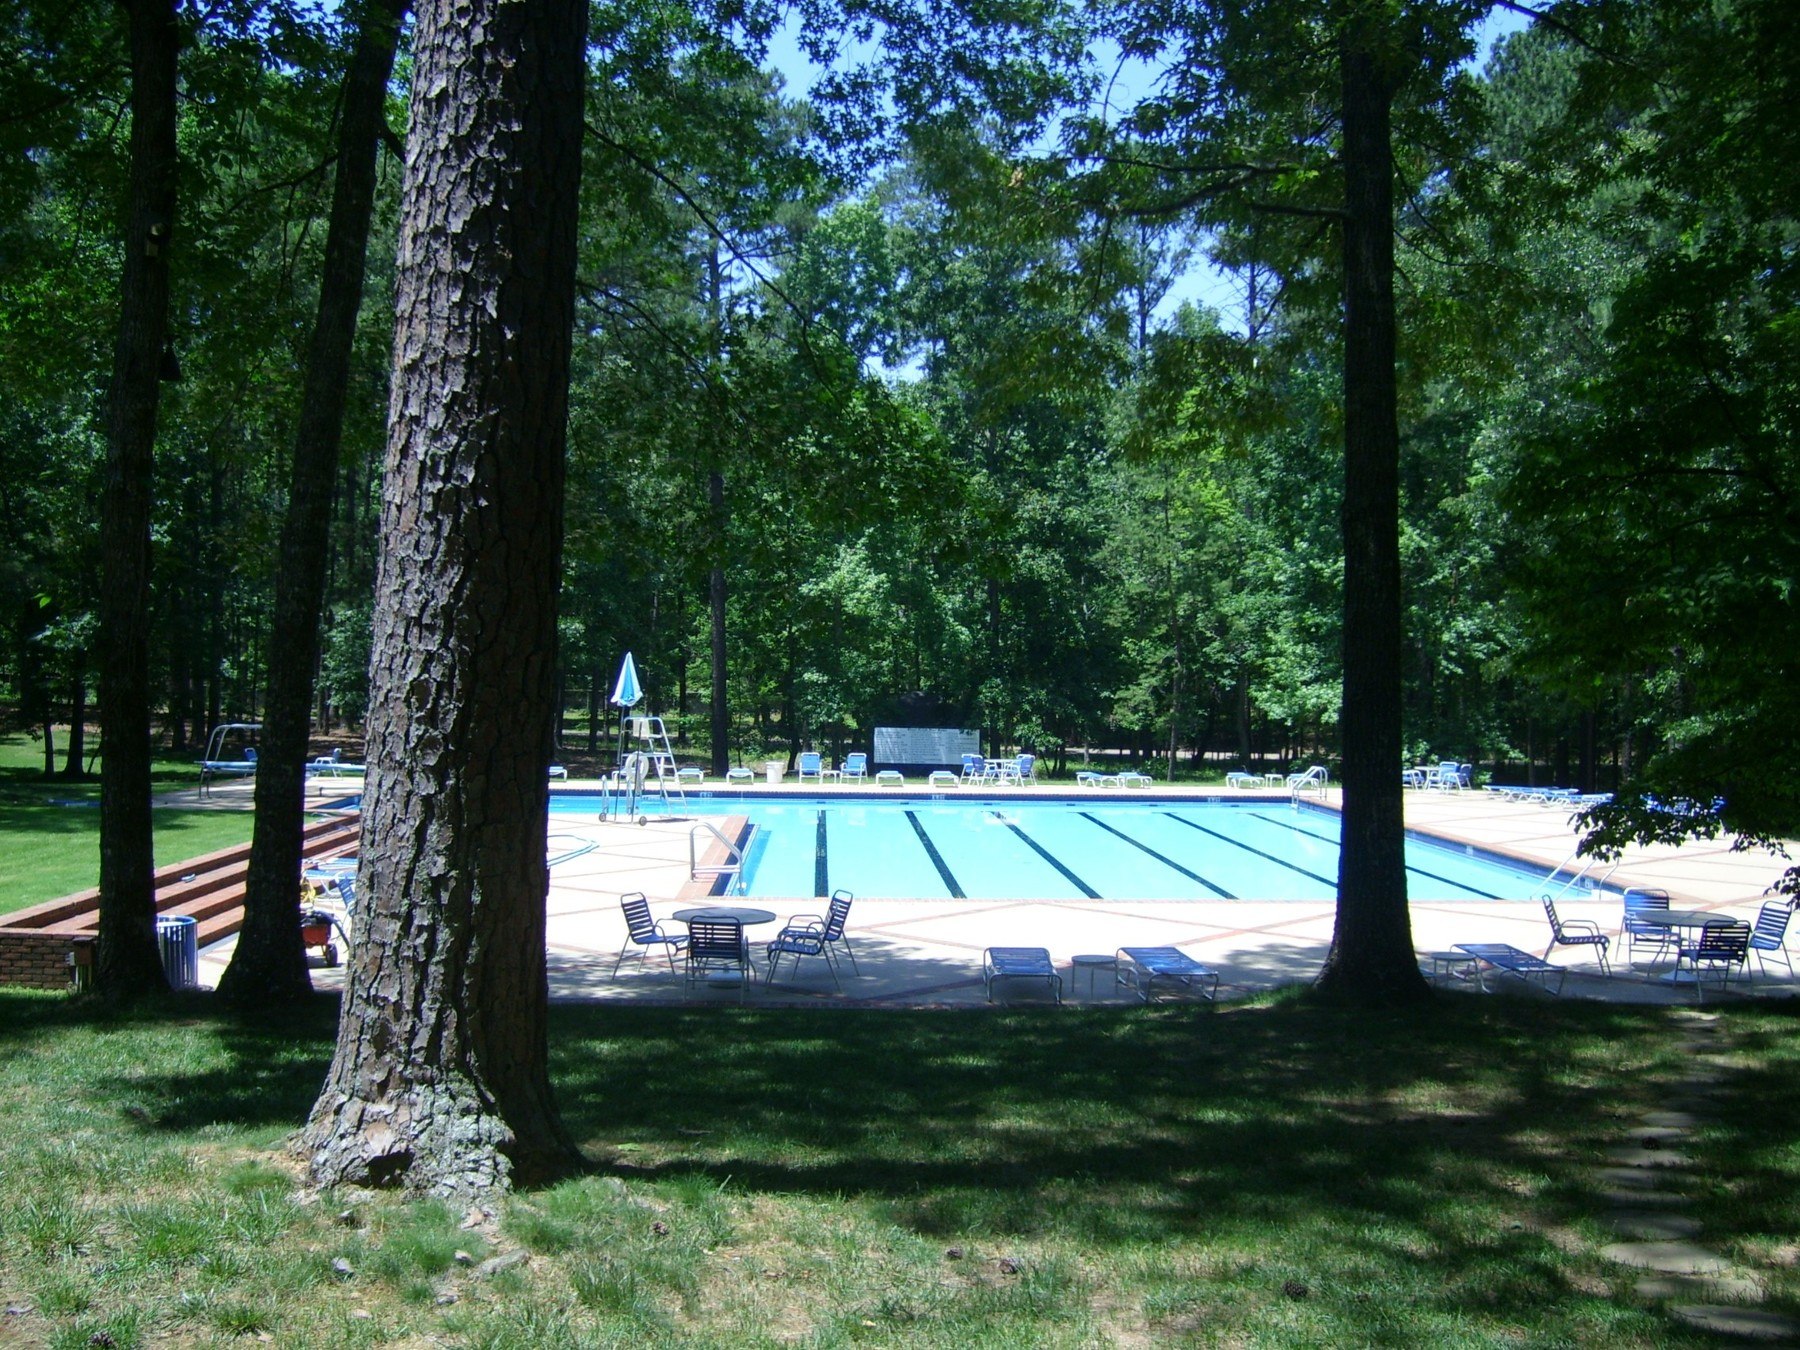 Lovely swimming pool surrounded by nature at Shoal Creek in Birmingham Alabama